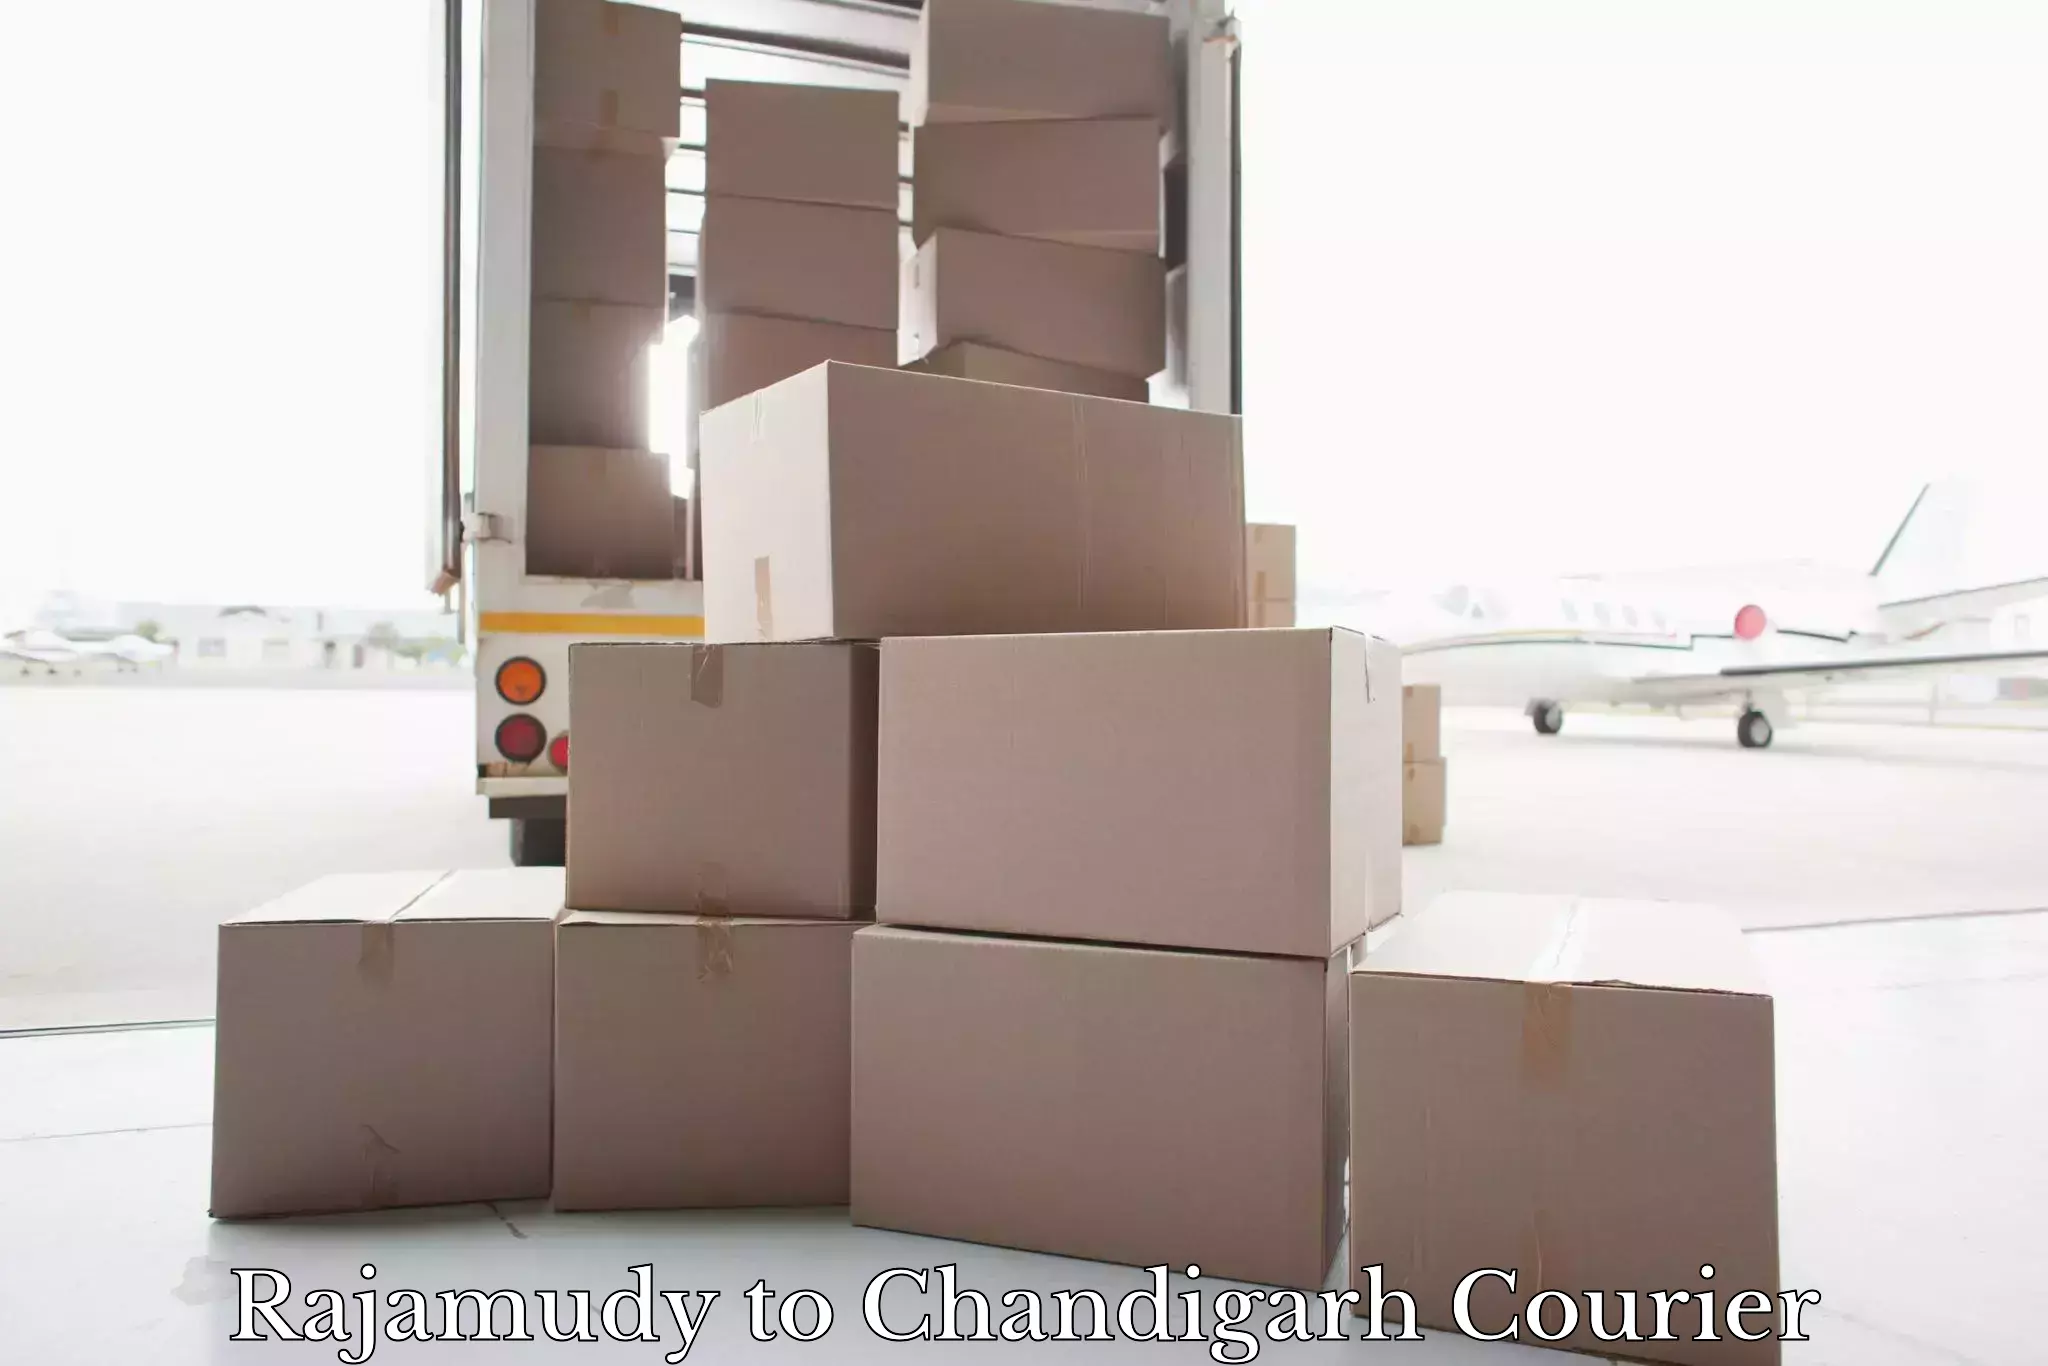 Luggage delivery providers Rajamudy to Chandigarh